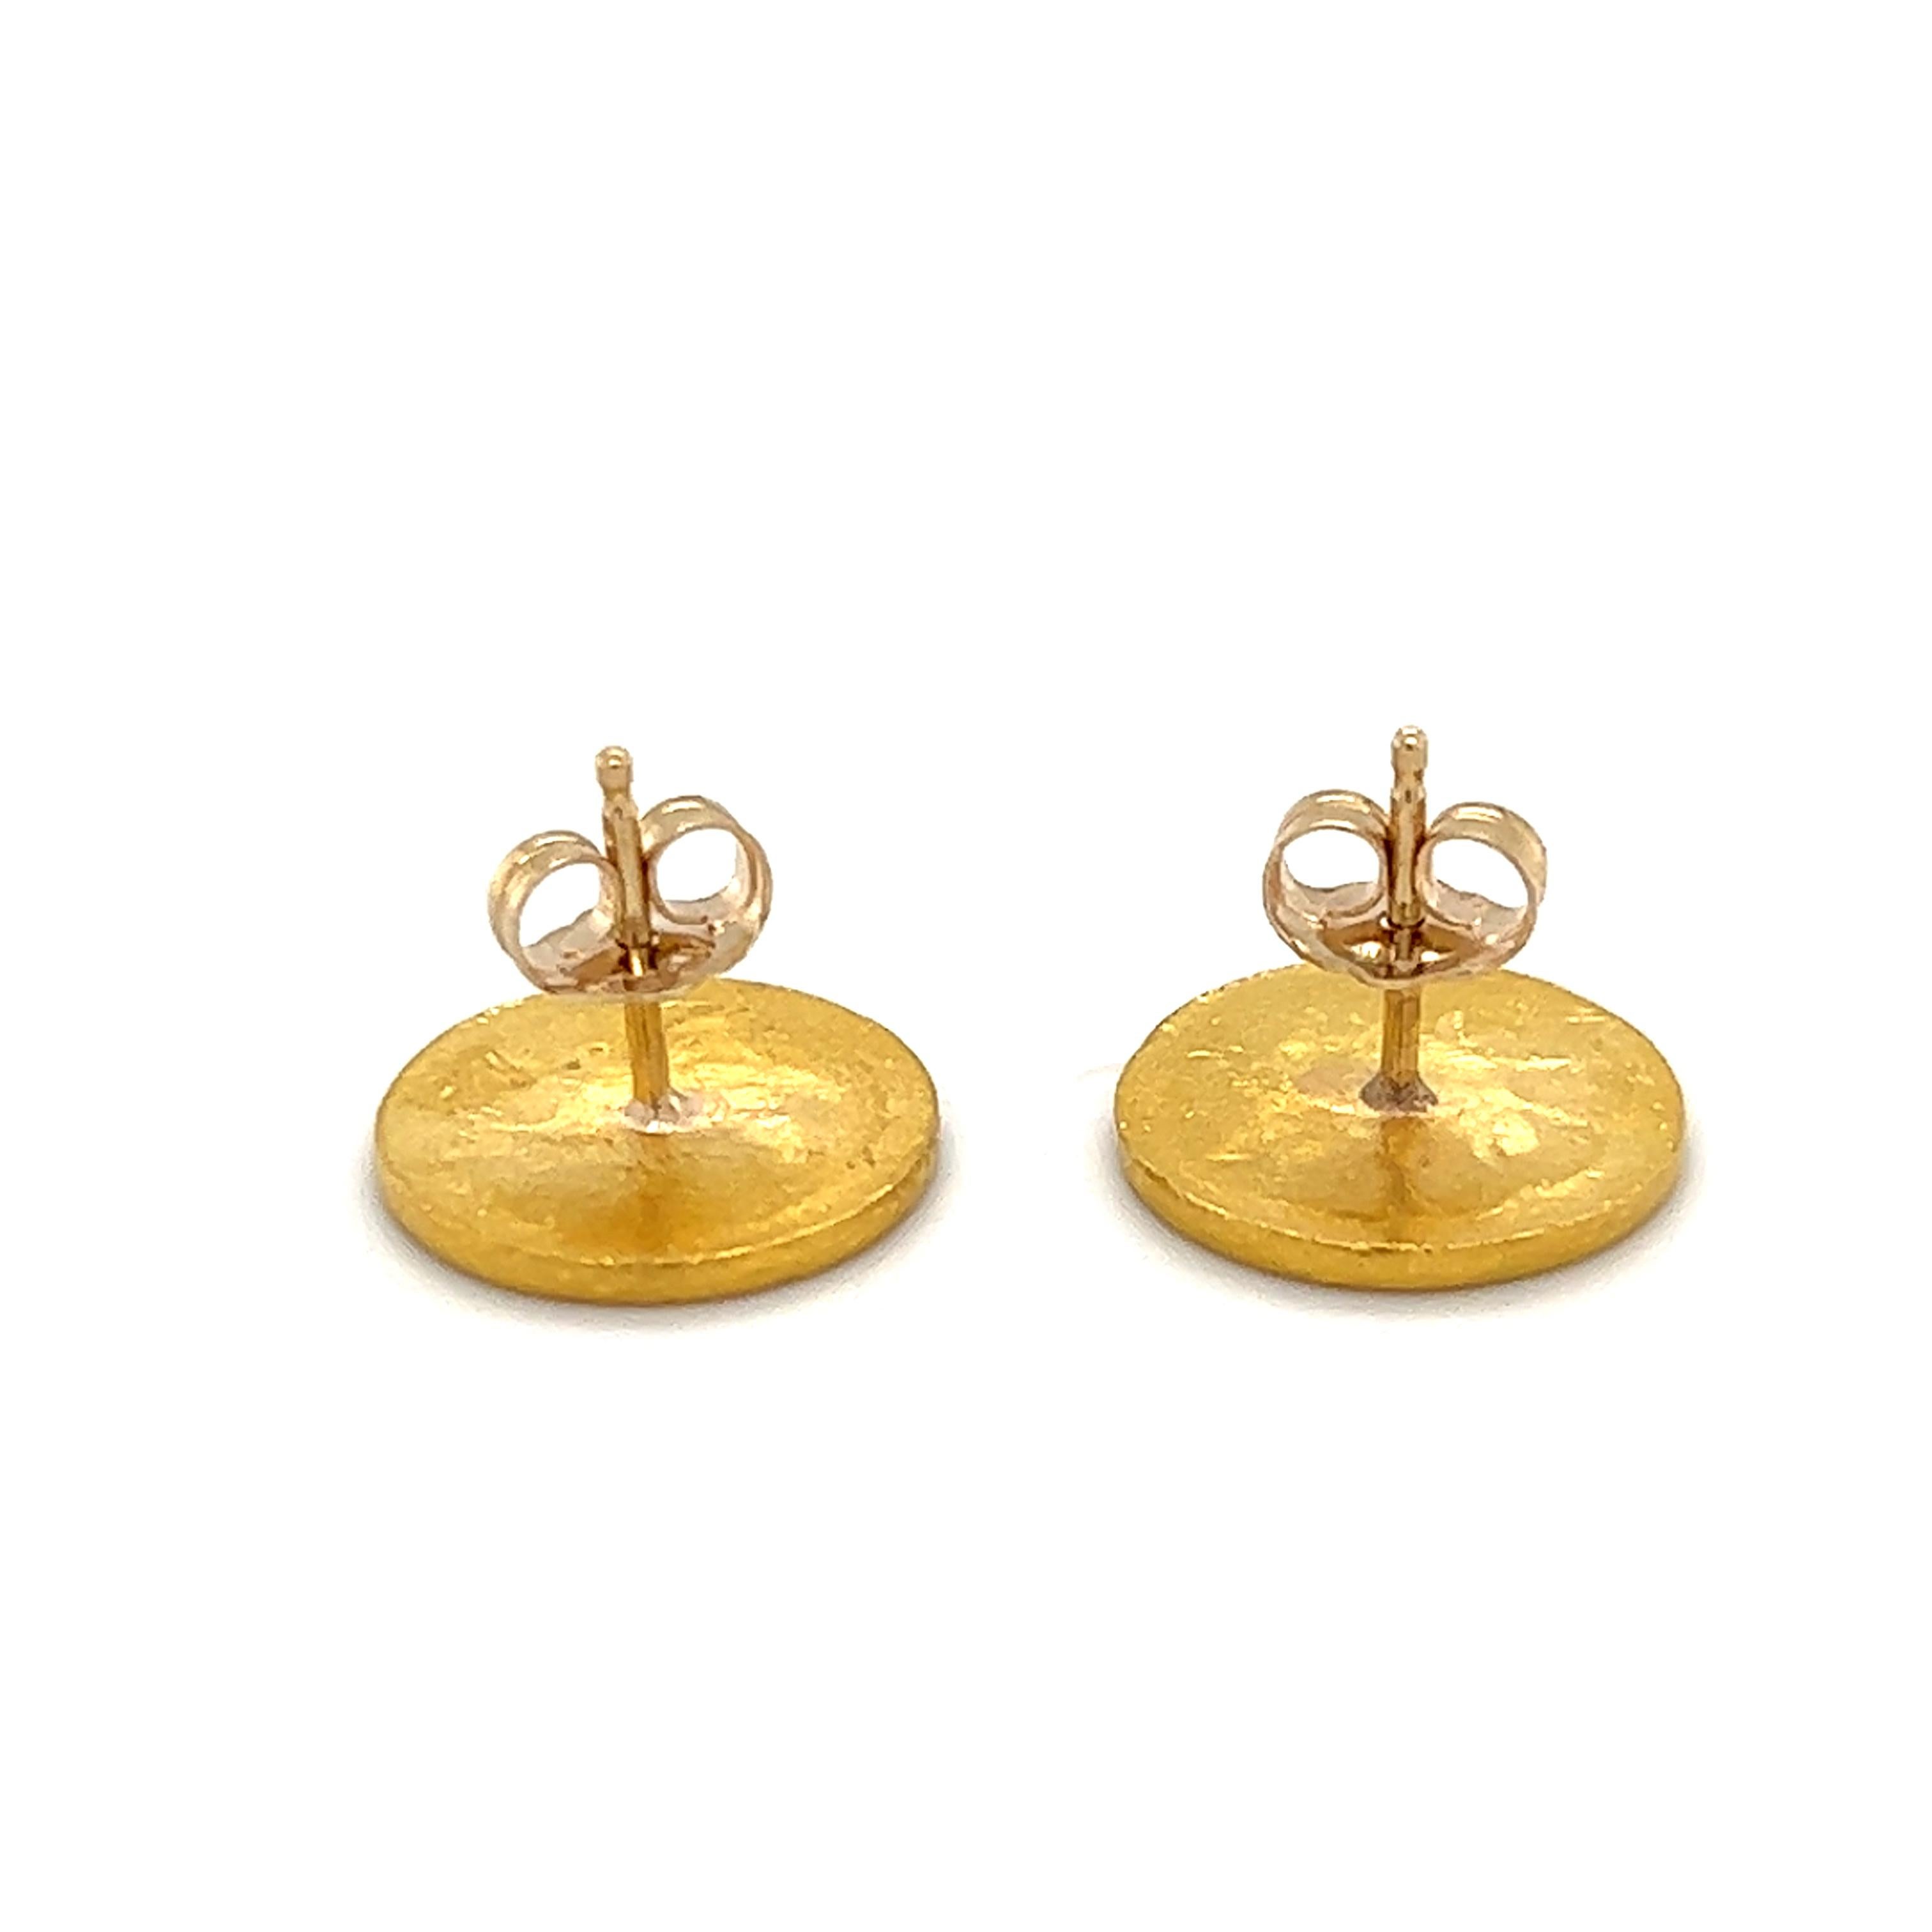 Contemporary Vintage 24K Yellow Gold Chinese Characters Earrings